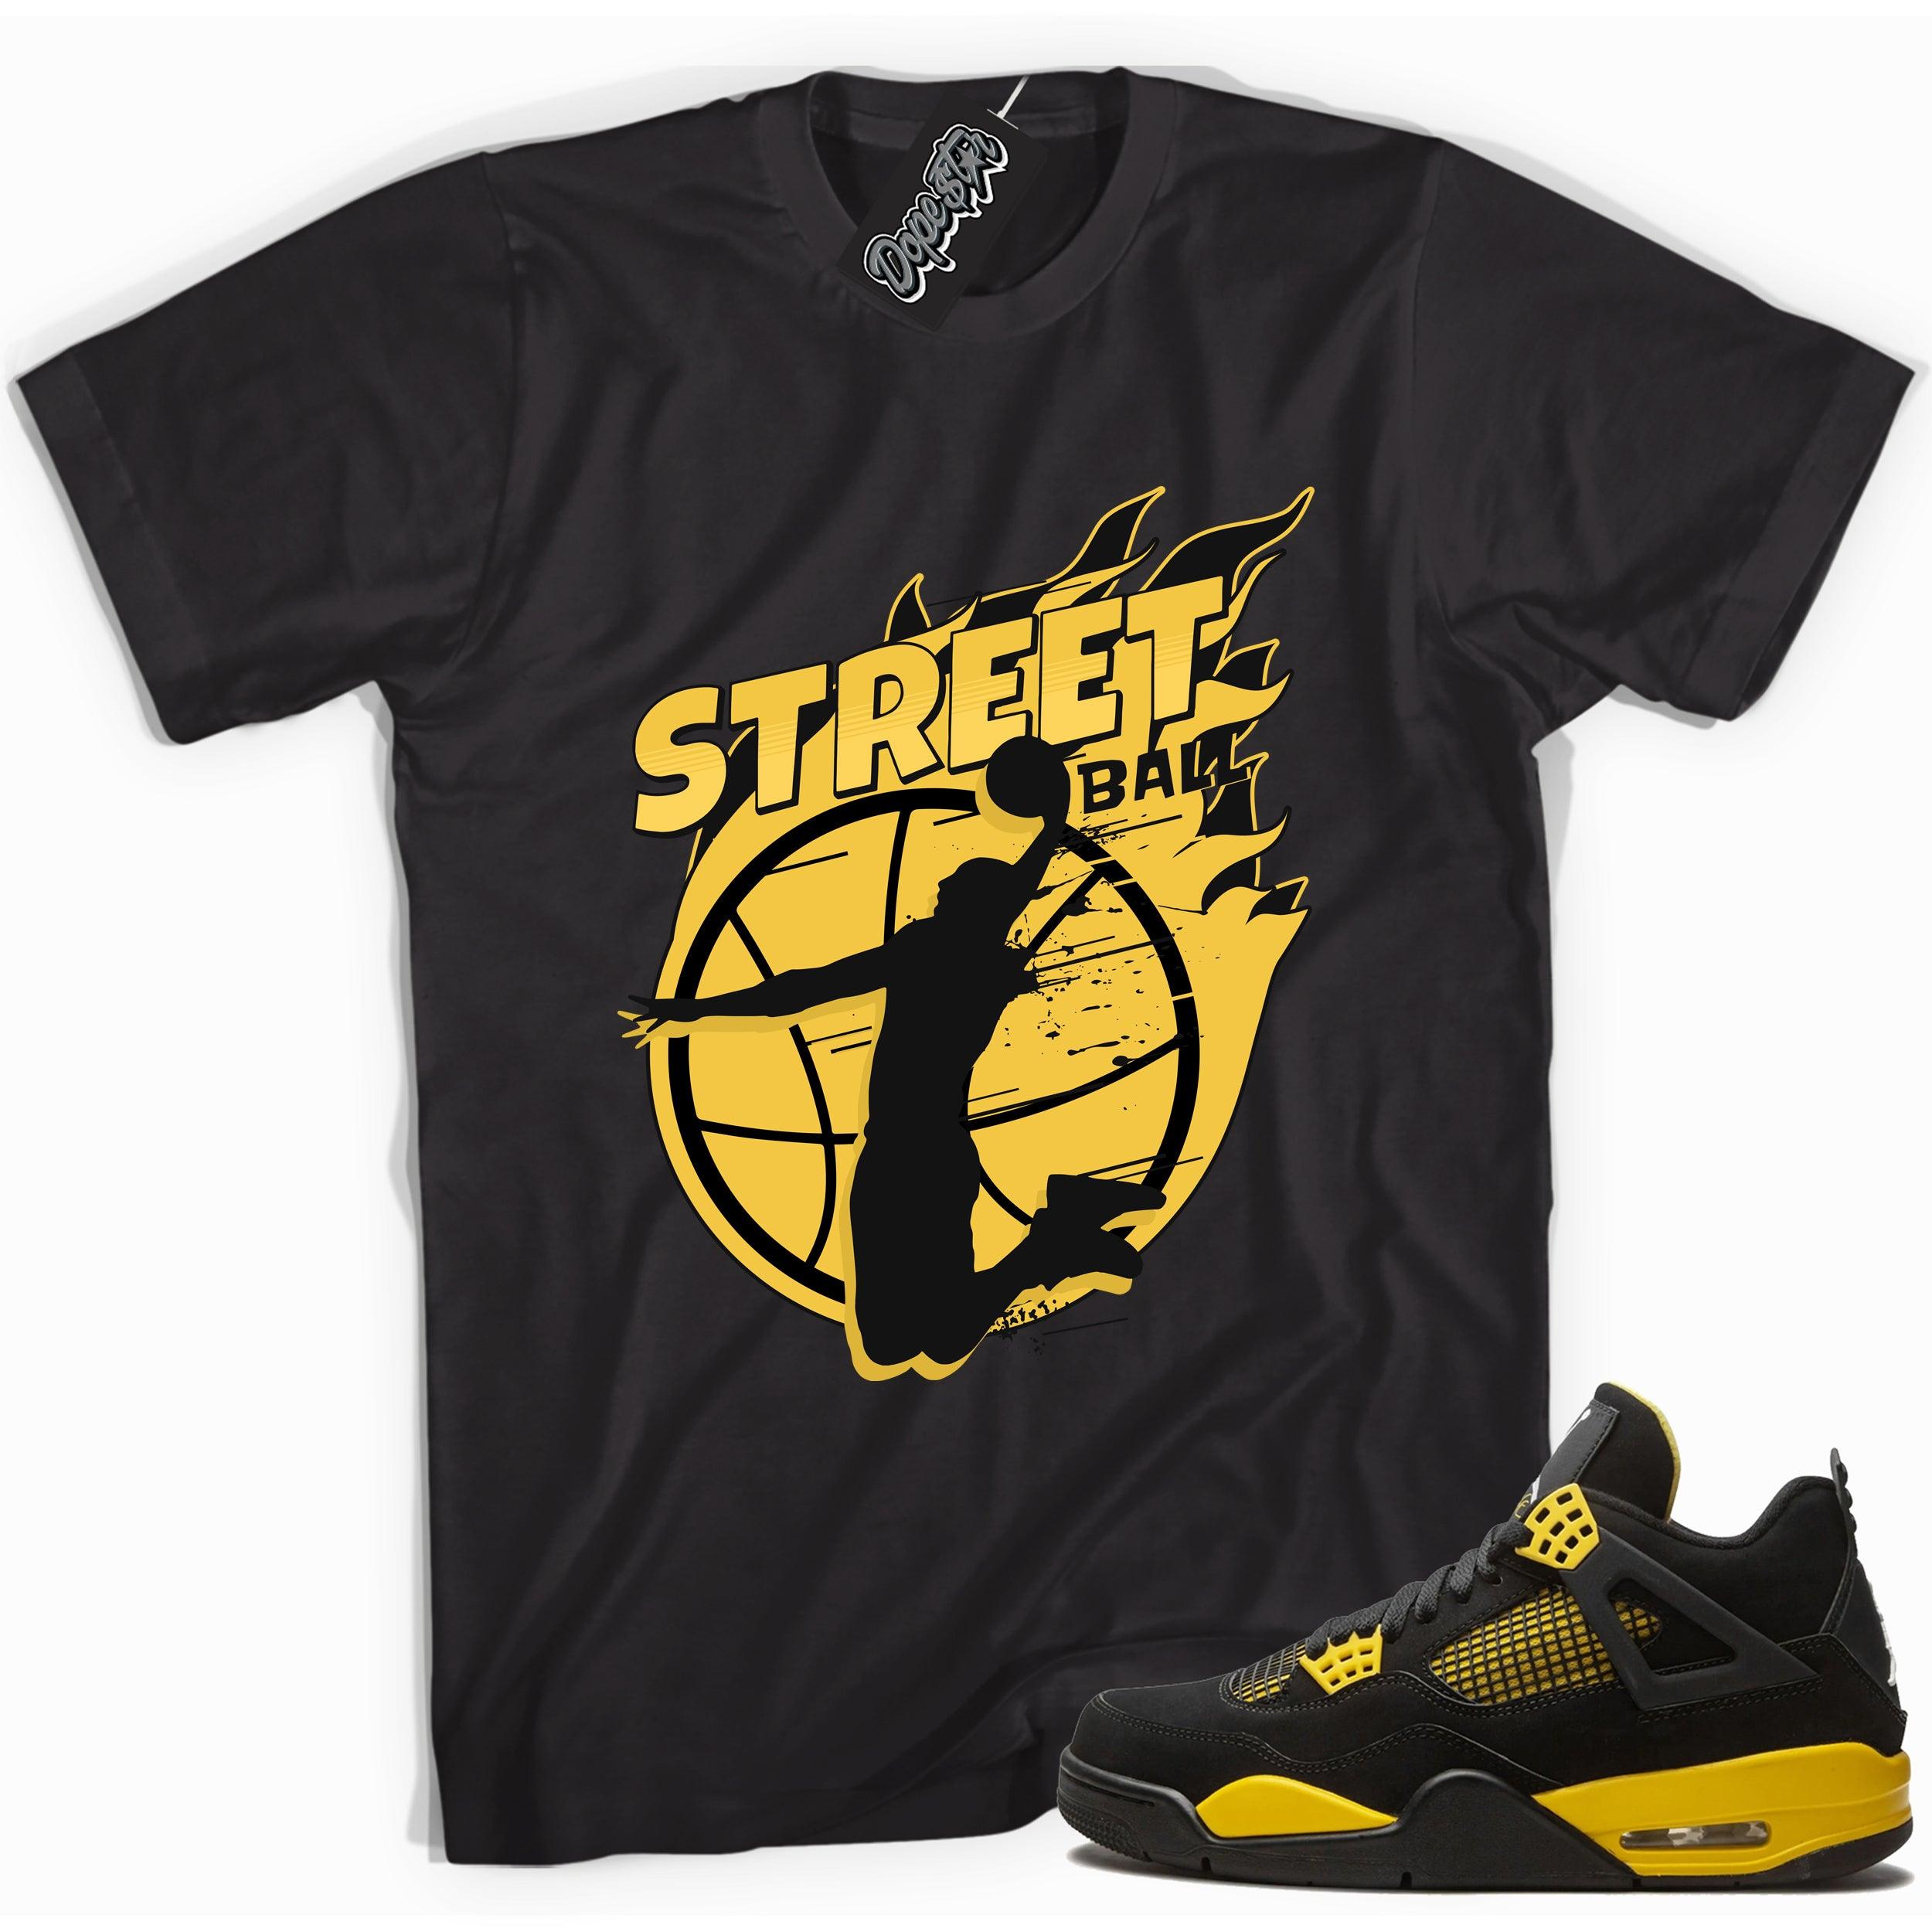 Cool black graphic tee with 'street ball' print, that perfectly matches  Air Jordan 4 Thunder sneakers